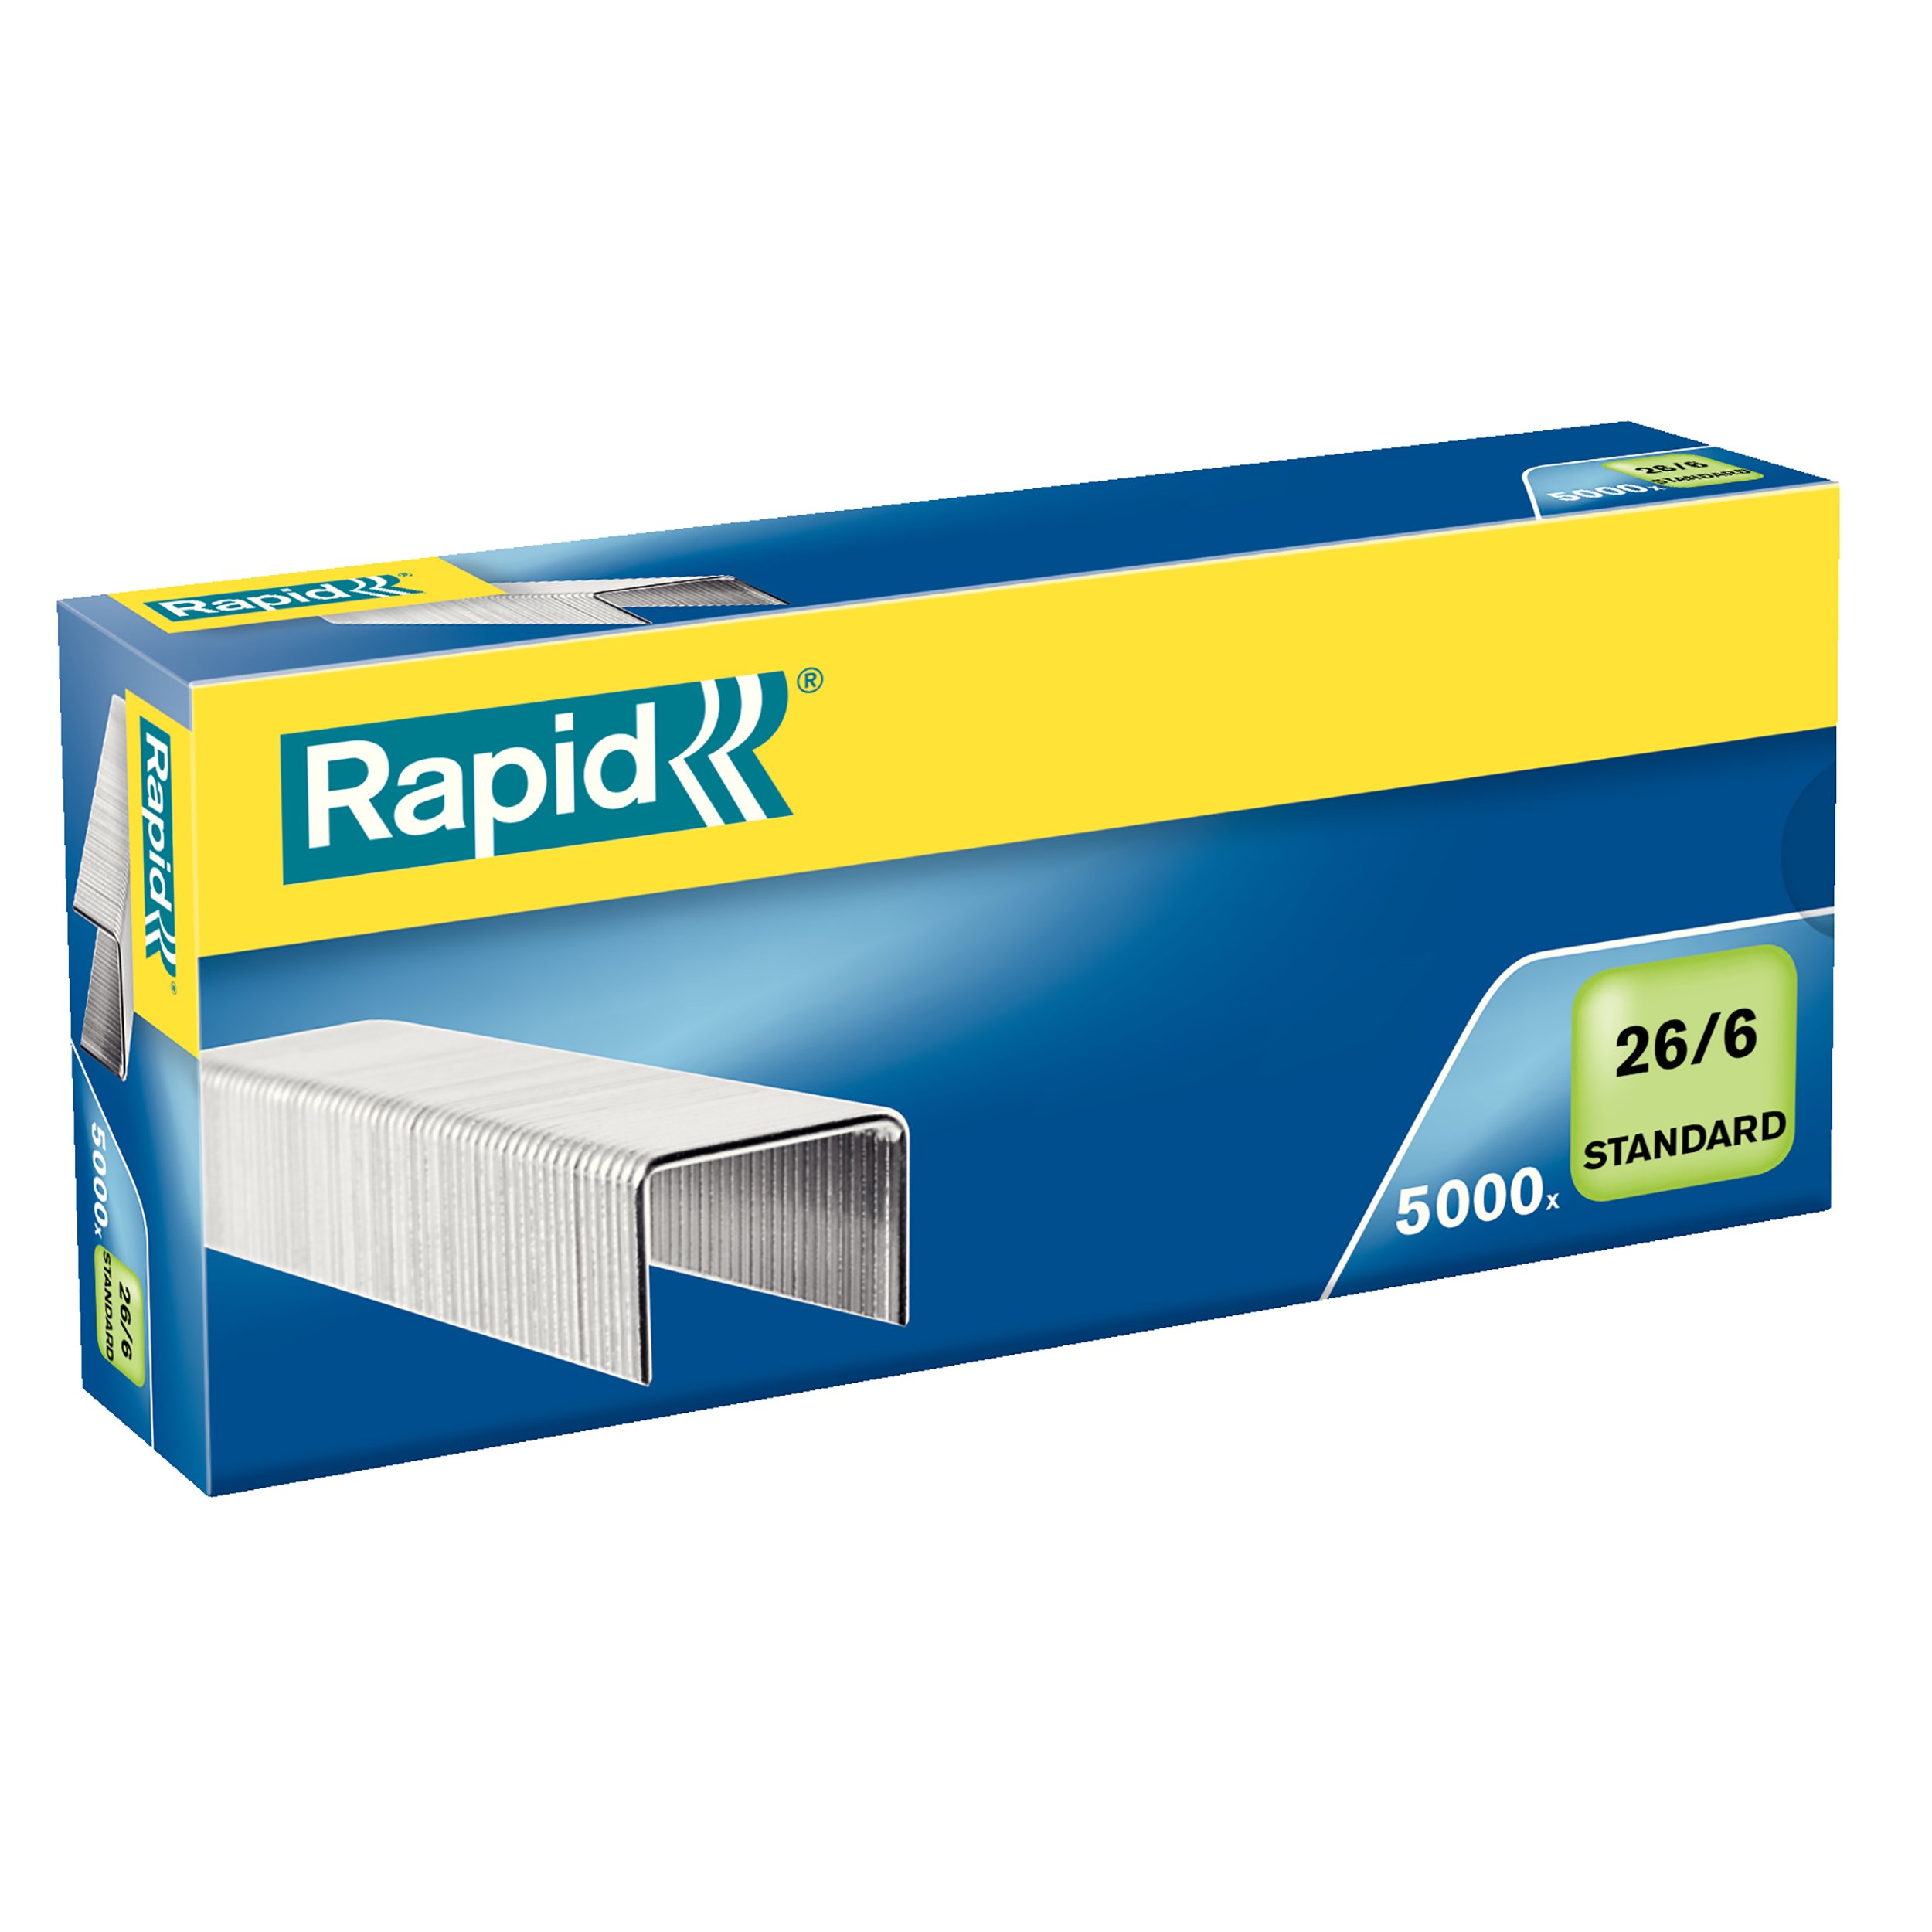 Rapid 26/6 Standard Staples (Pkt 5000) - Click Image to Close